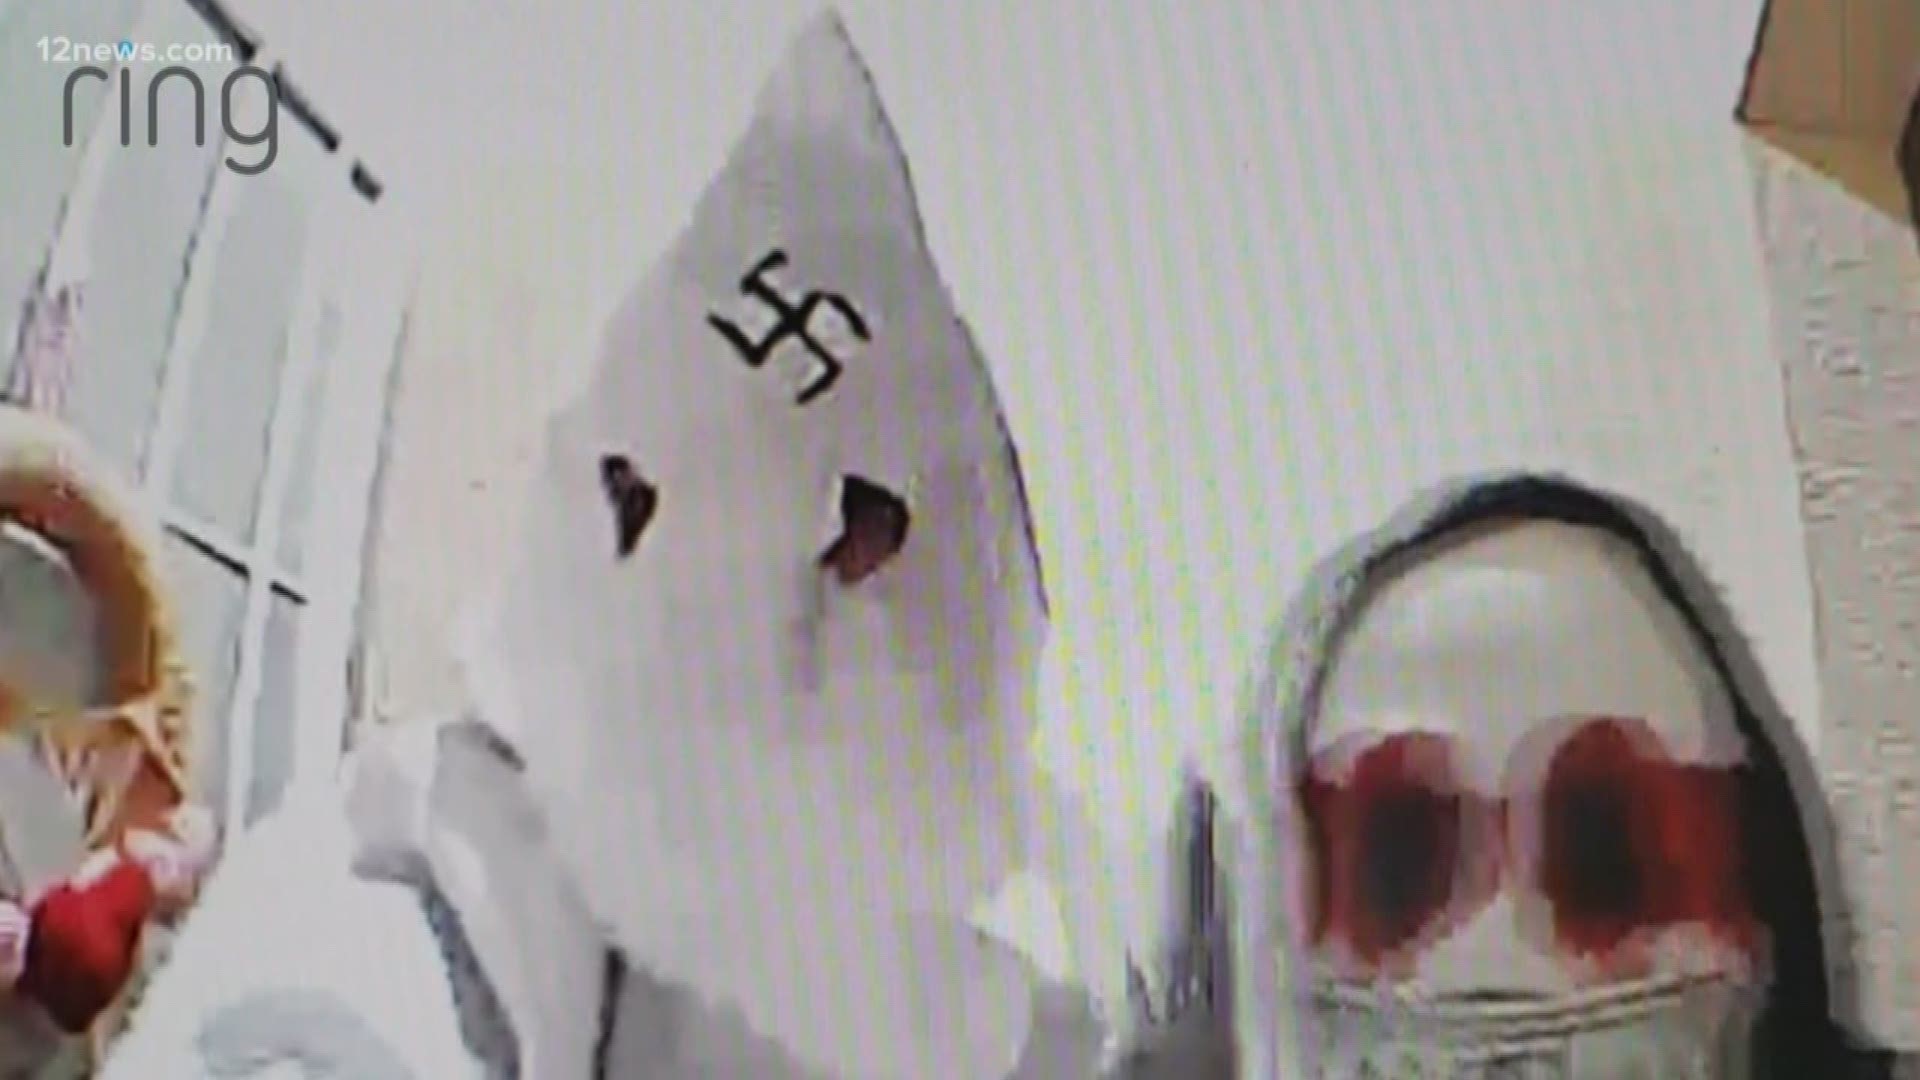 A doorbell camera at an Anthem home caught two threatening visitors, one was wearing a KKK costume. Phoenix Police is investigating it as a hate crime. If you have any questions call Phoenix PD.